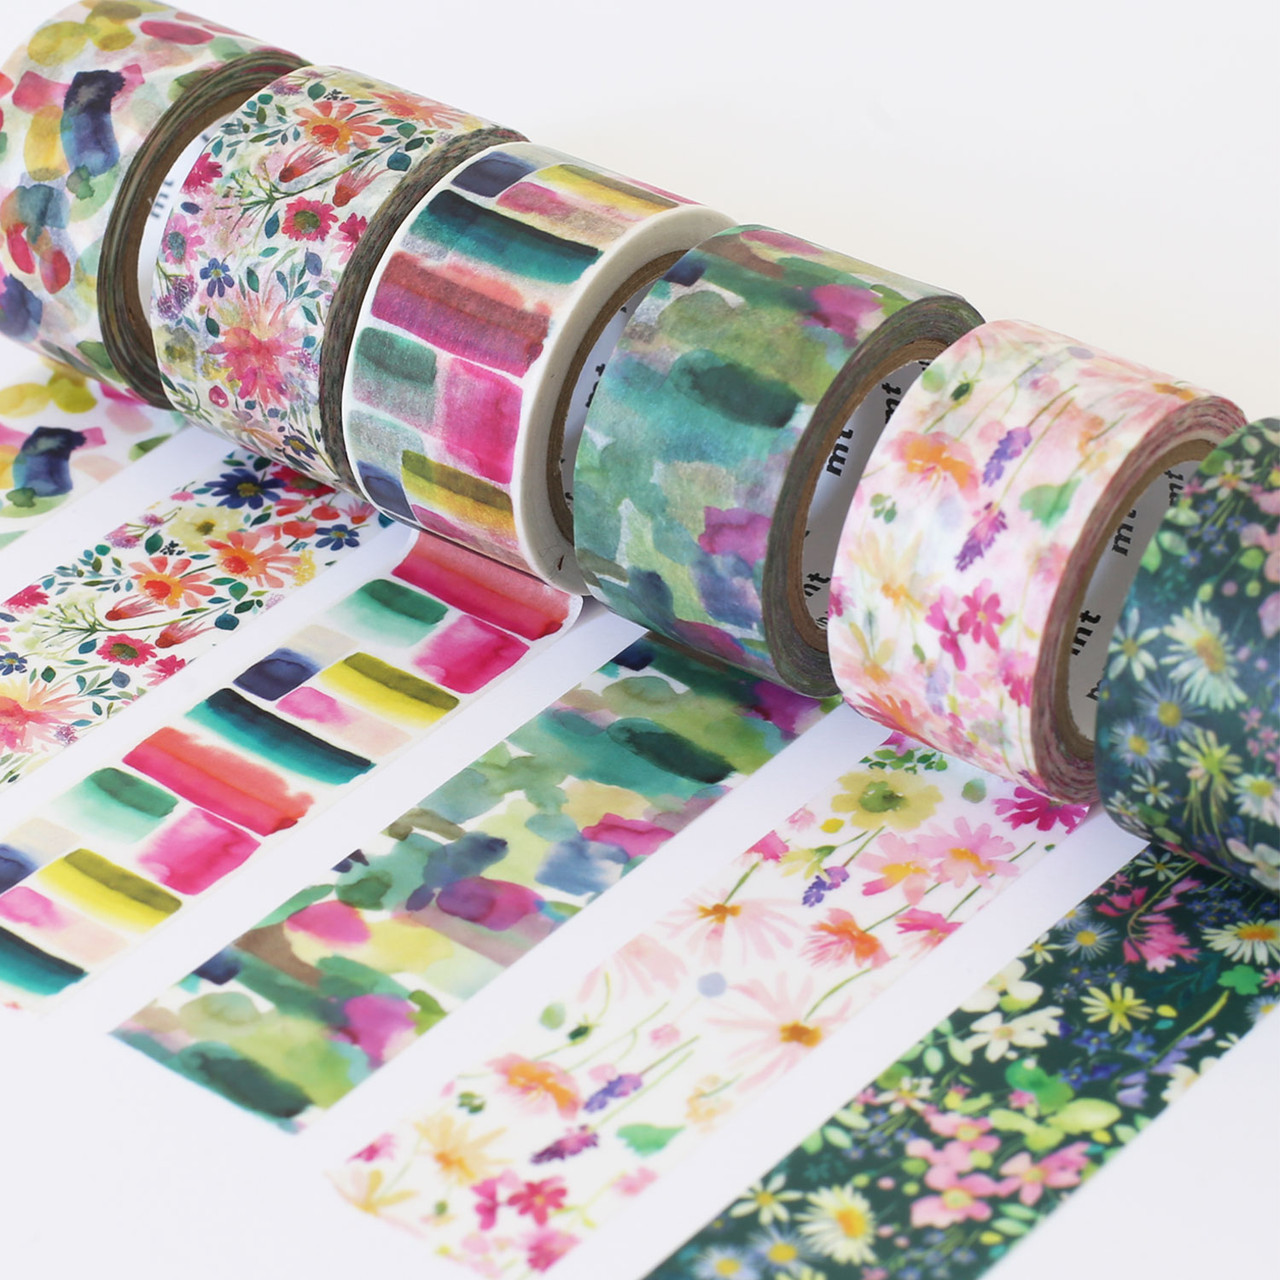 Washi Tape Lots for sale in Paerata, New Zealand